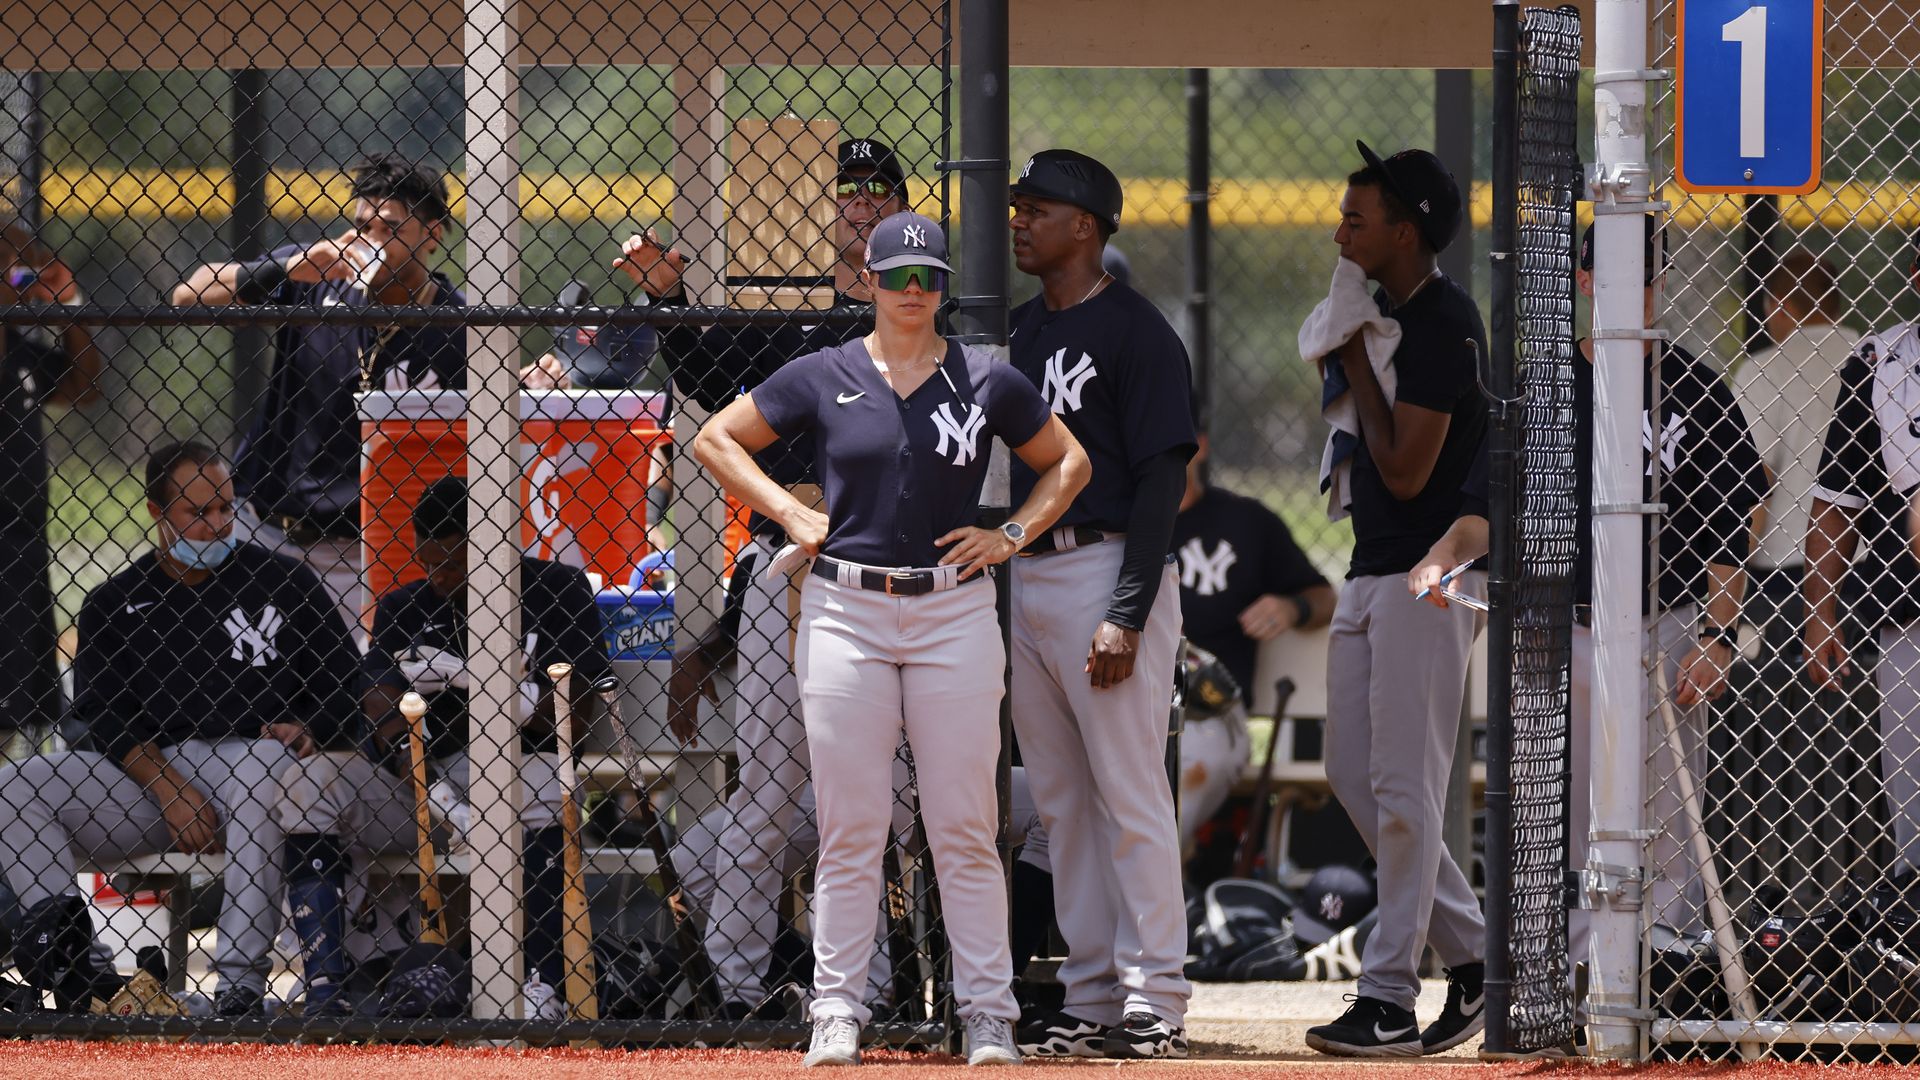 Hitting coach Rachel Balkovec of the Yankees looks on during the Florida Complex League (FCL) game between the FCL New York Yankees and FCL Detroit Tigers.